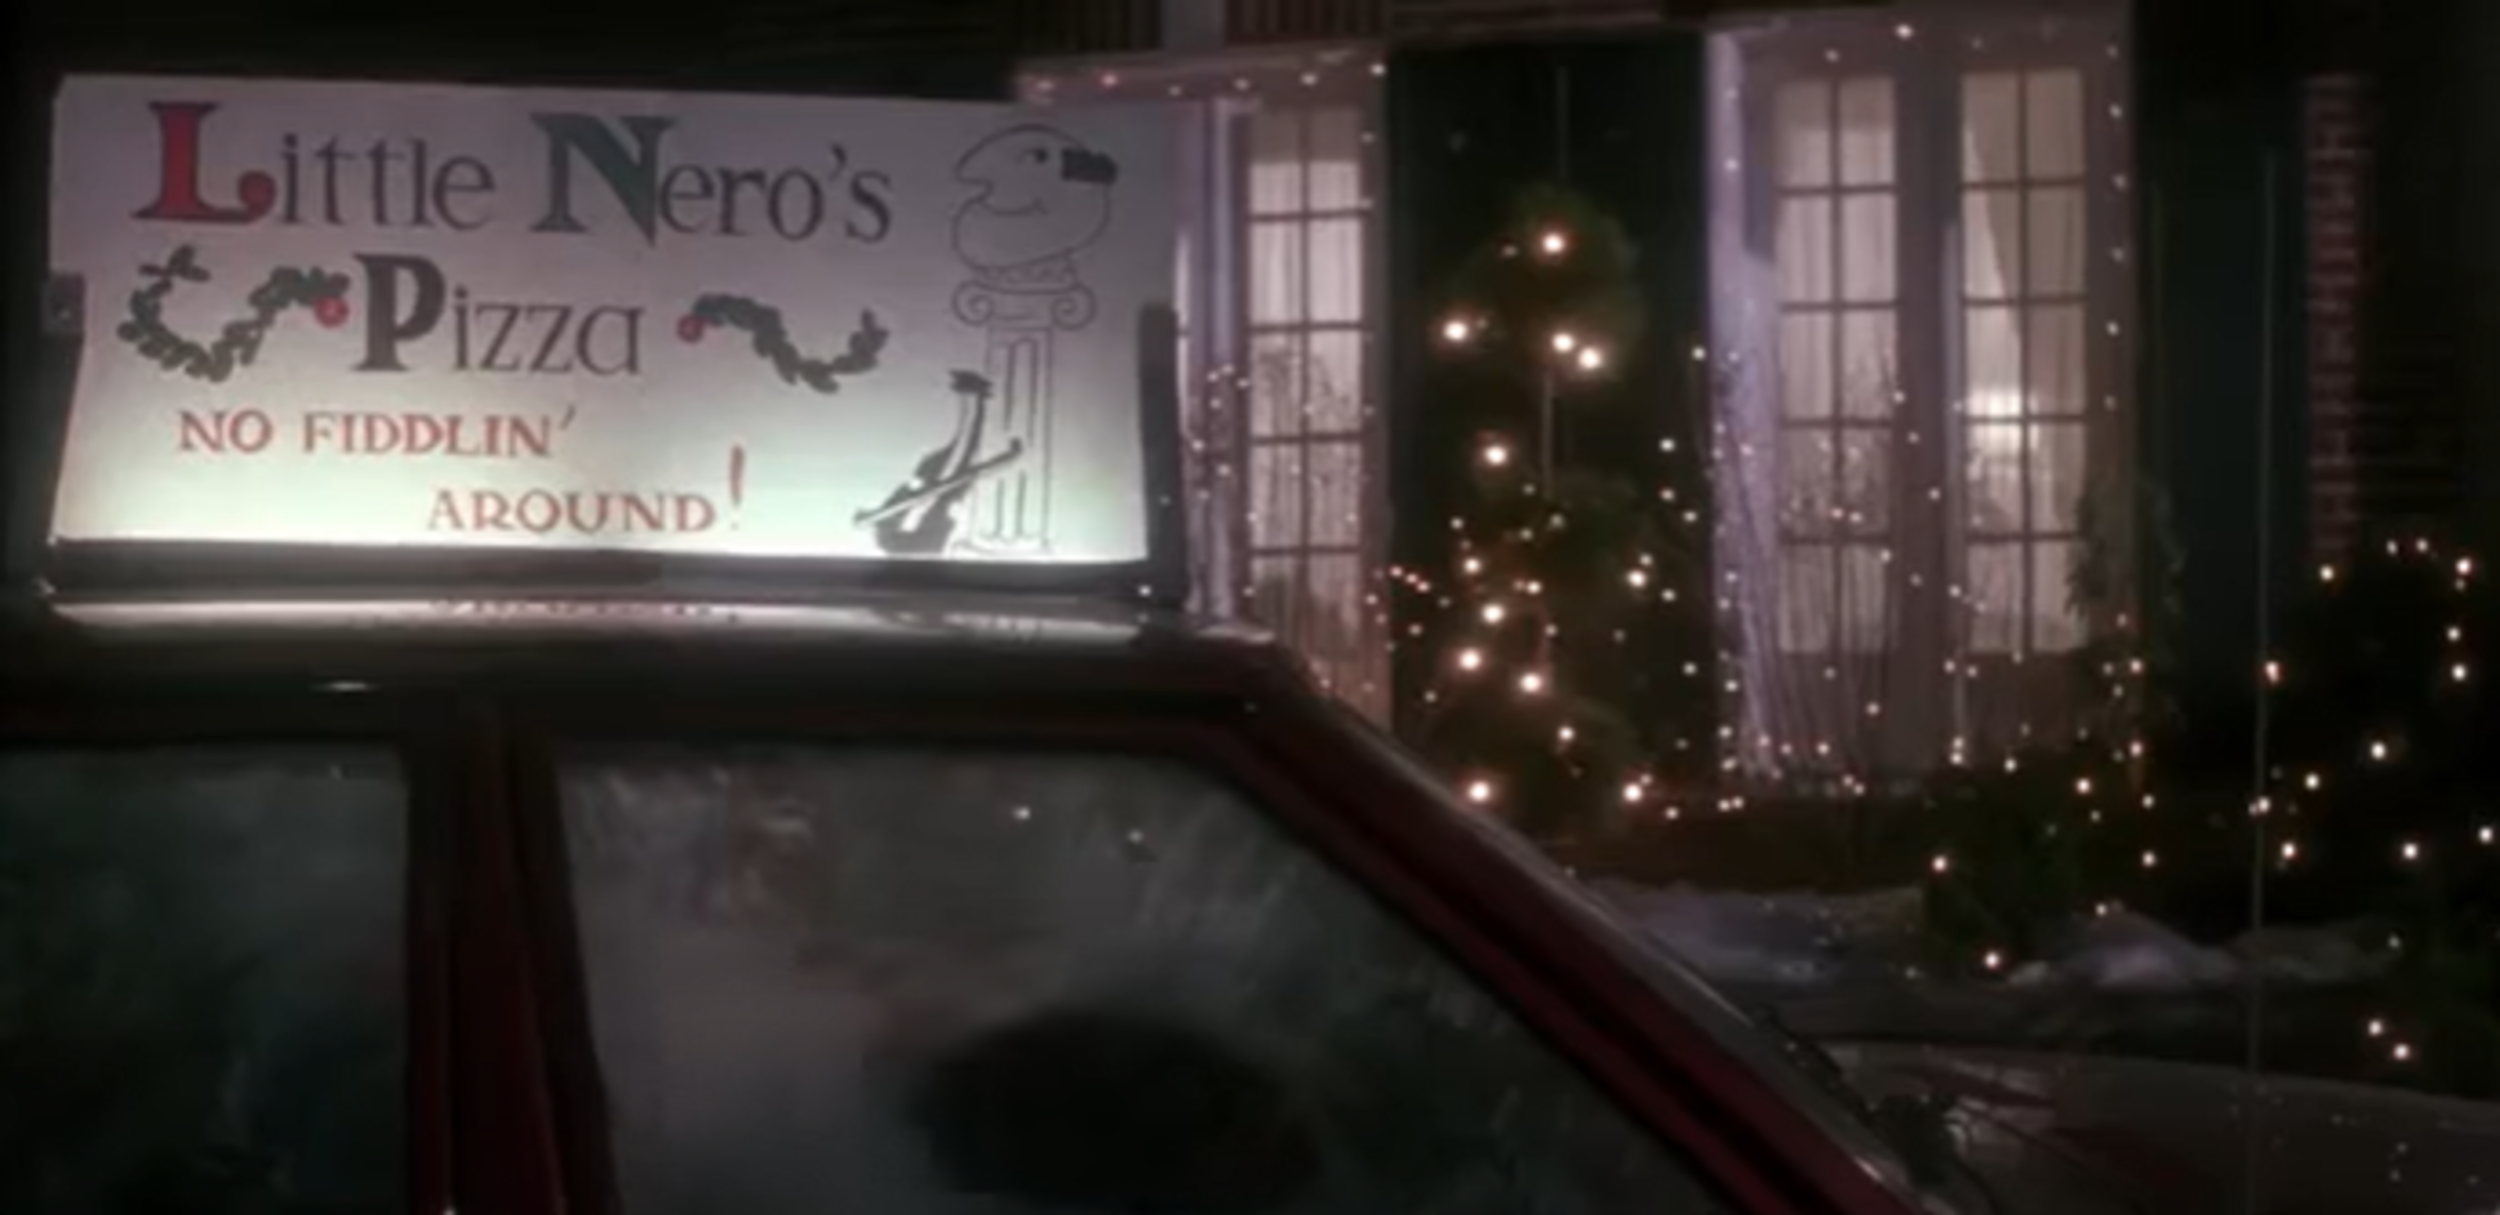 <p>There are plenty of memorable moments from <em>Home Alone</em>, but one of the lasting memories of the film is Kevin's creative genius when it came to ordering a pizza from Little Nero's Pizza. Leave it to Kevin (Macaulay Culkin) <a href="https://www.youtube.com/watch?v=5E1MuzPHUFc">to have a little fun with the unassuming delivery boy</a> by manipulating the dialogue to the old movie <em>Angels with Filthy Souls,</em> from a gangster-like figure. The scene was contactless delivery before its time.</p><p><a href='https://www.msn.com/en-us/community/channel/vid-cj9pqbr0vn9in2b6ddcd8sfgpfq6x6utp44fssrv6mc2gtybw0us'>Follow us on MSN to see more of our exclusive entertainment content.</a></p>